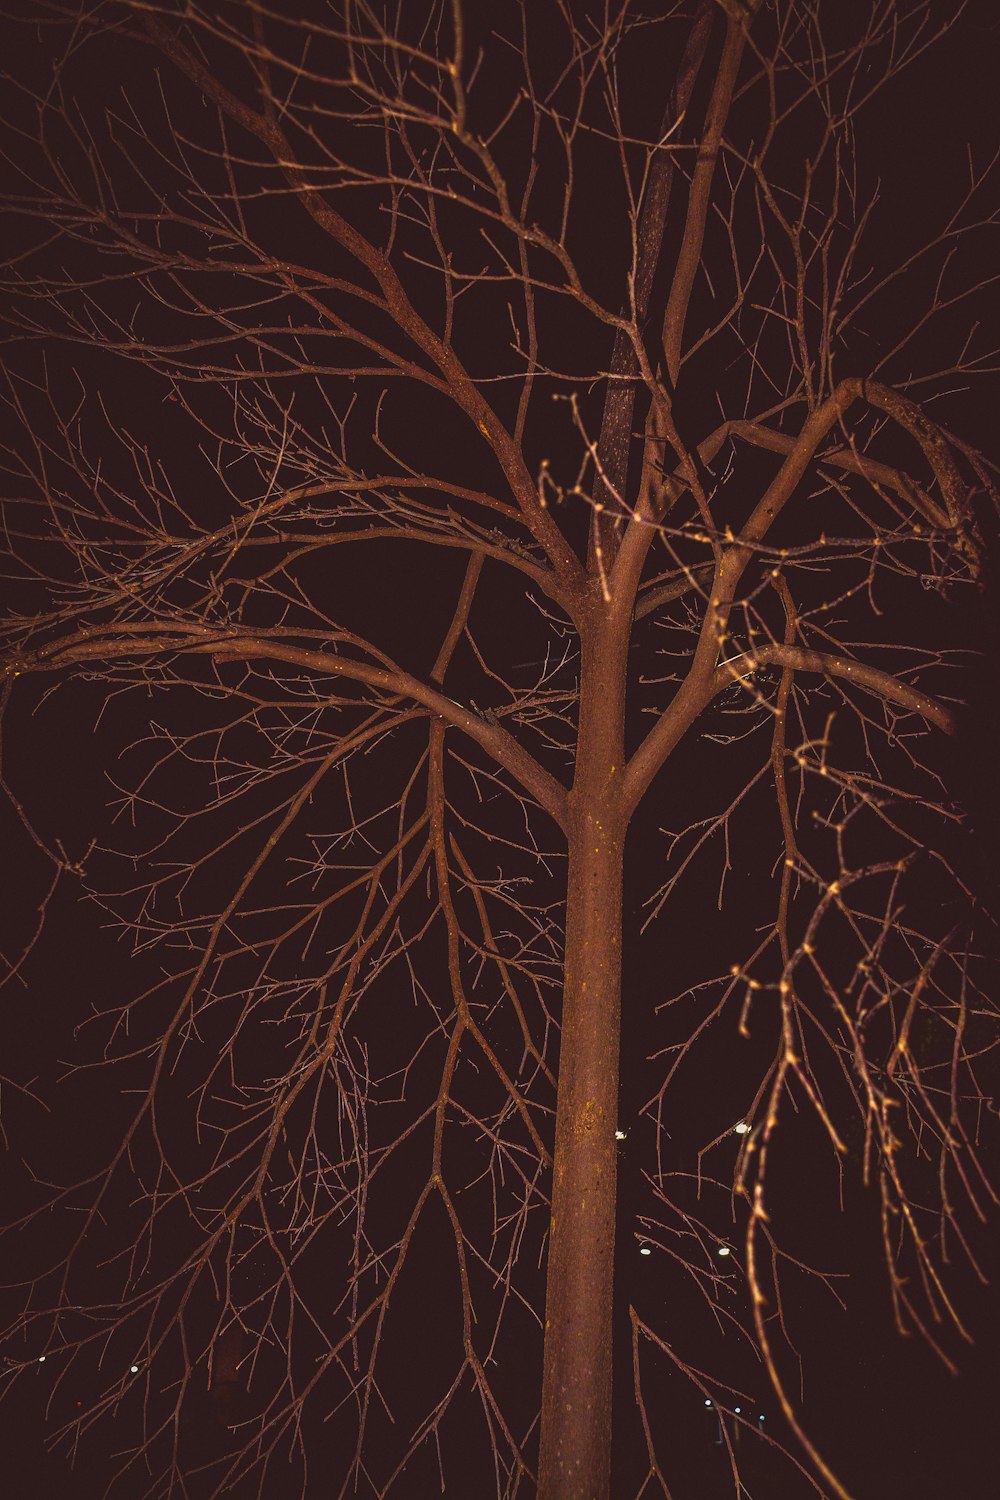 a bare tree with no leaves at night